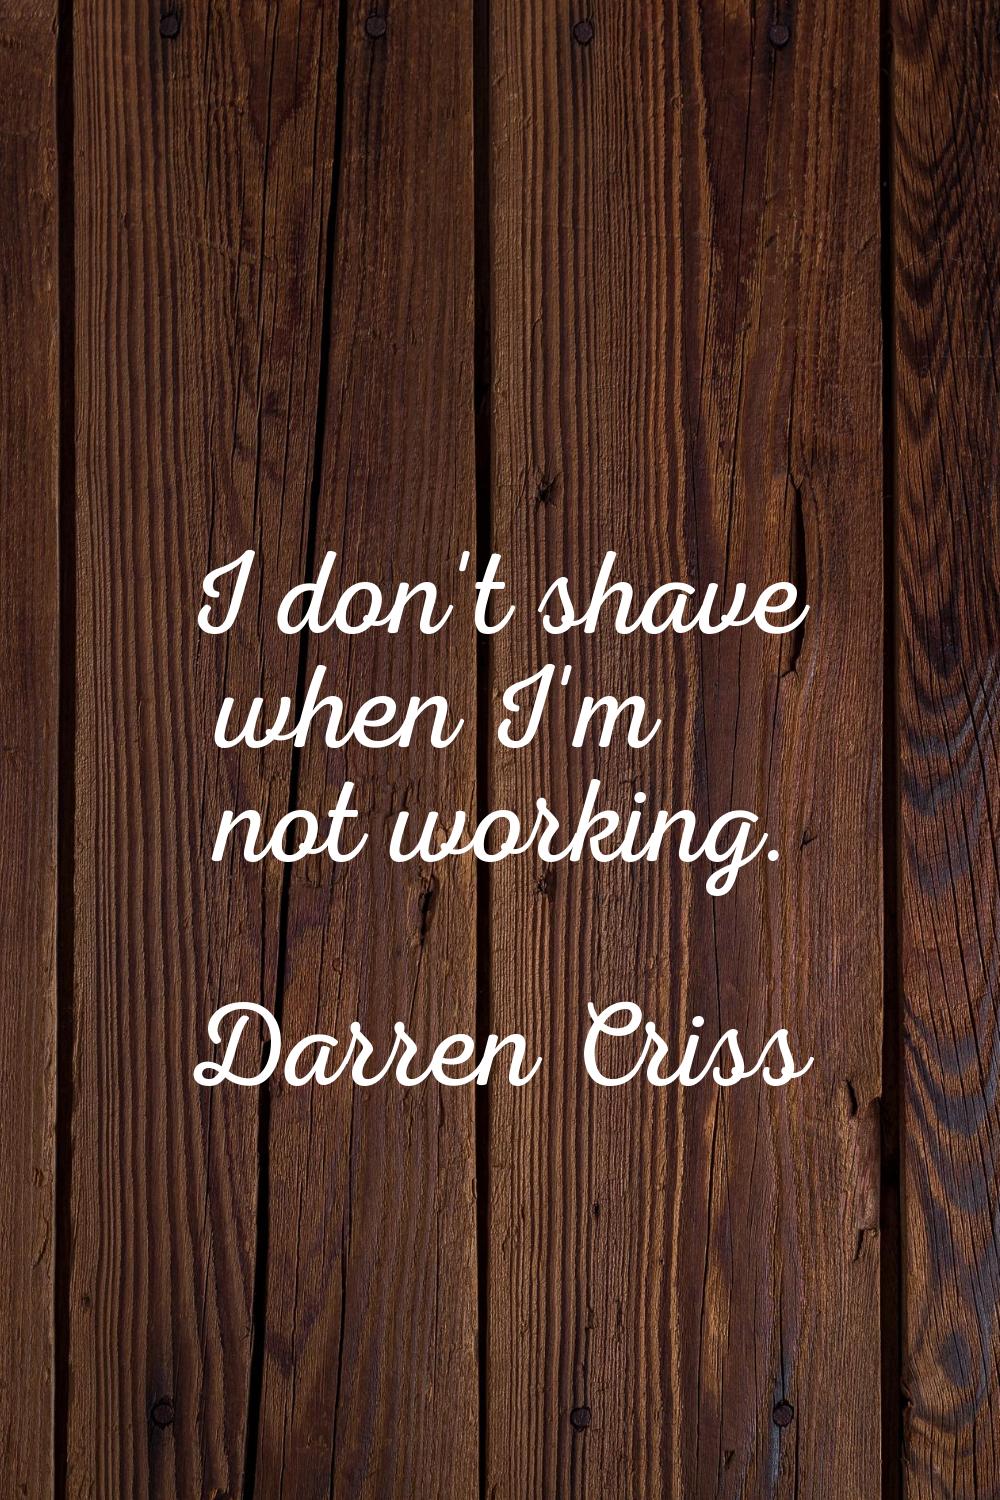 I don't shave when I'm not working.